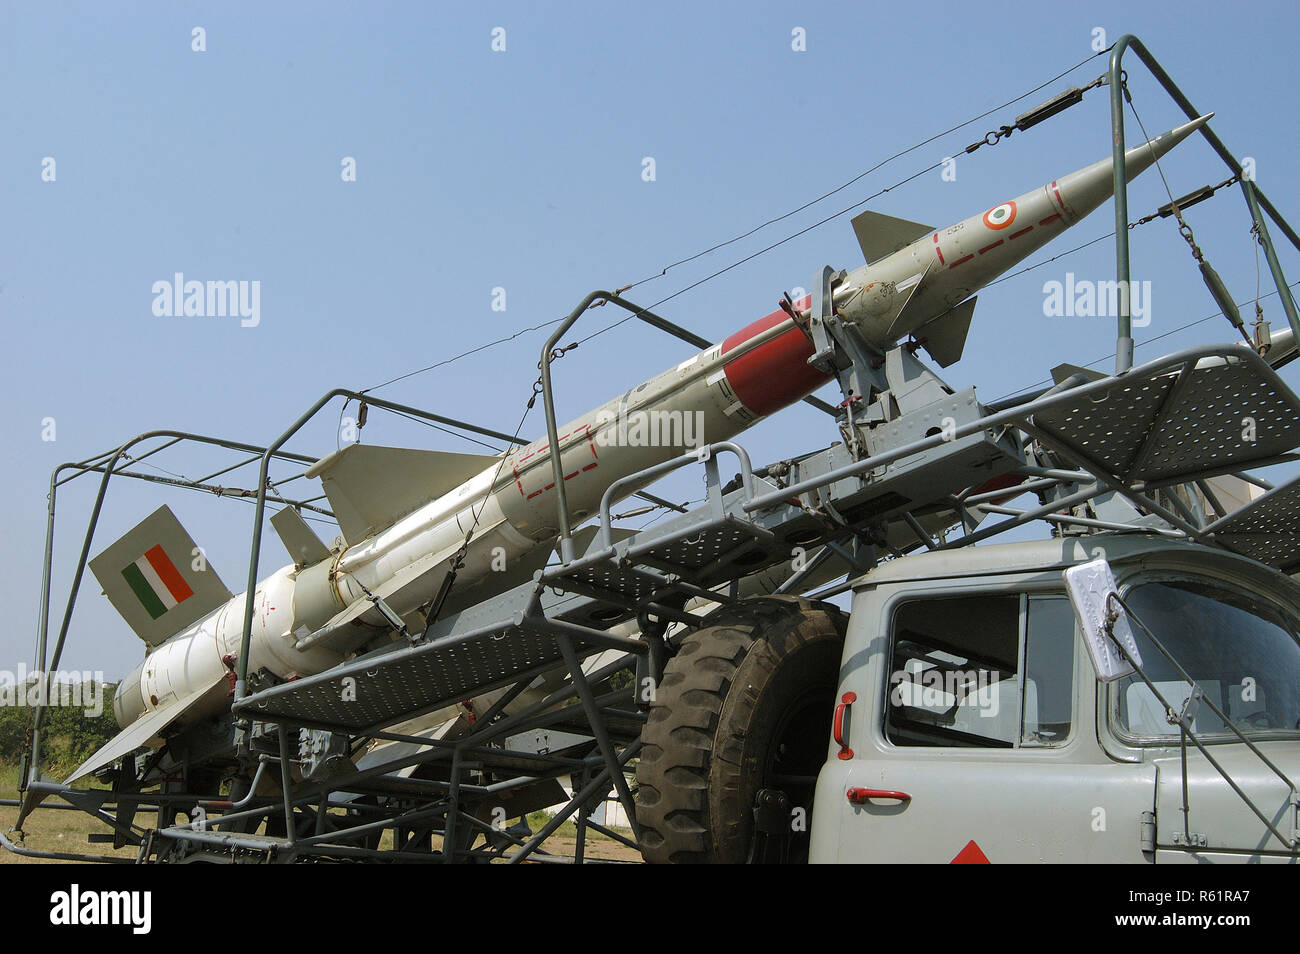 Sam lll Pechora surface to air Missile used in Air Defense with a range of 25 km. Stock Photo